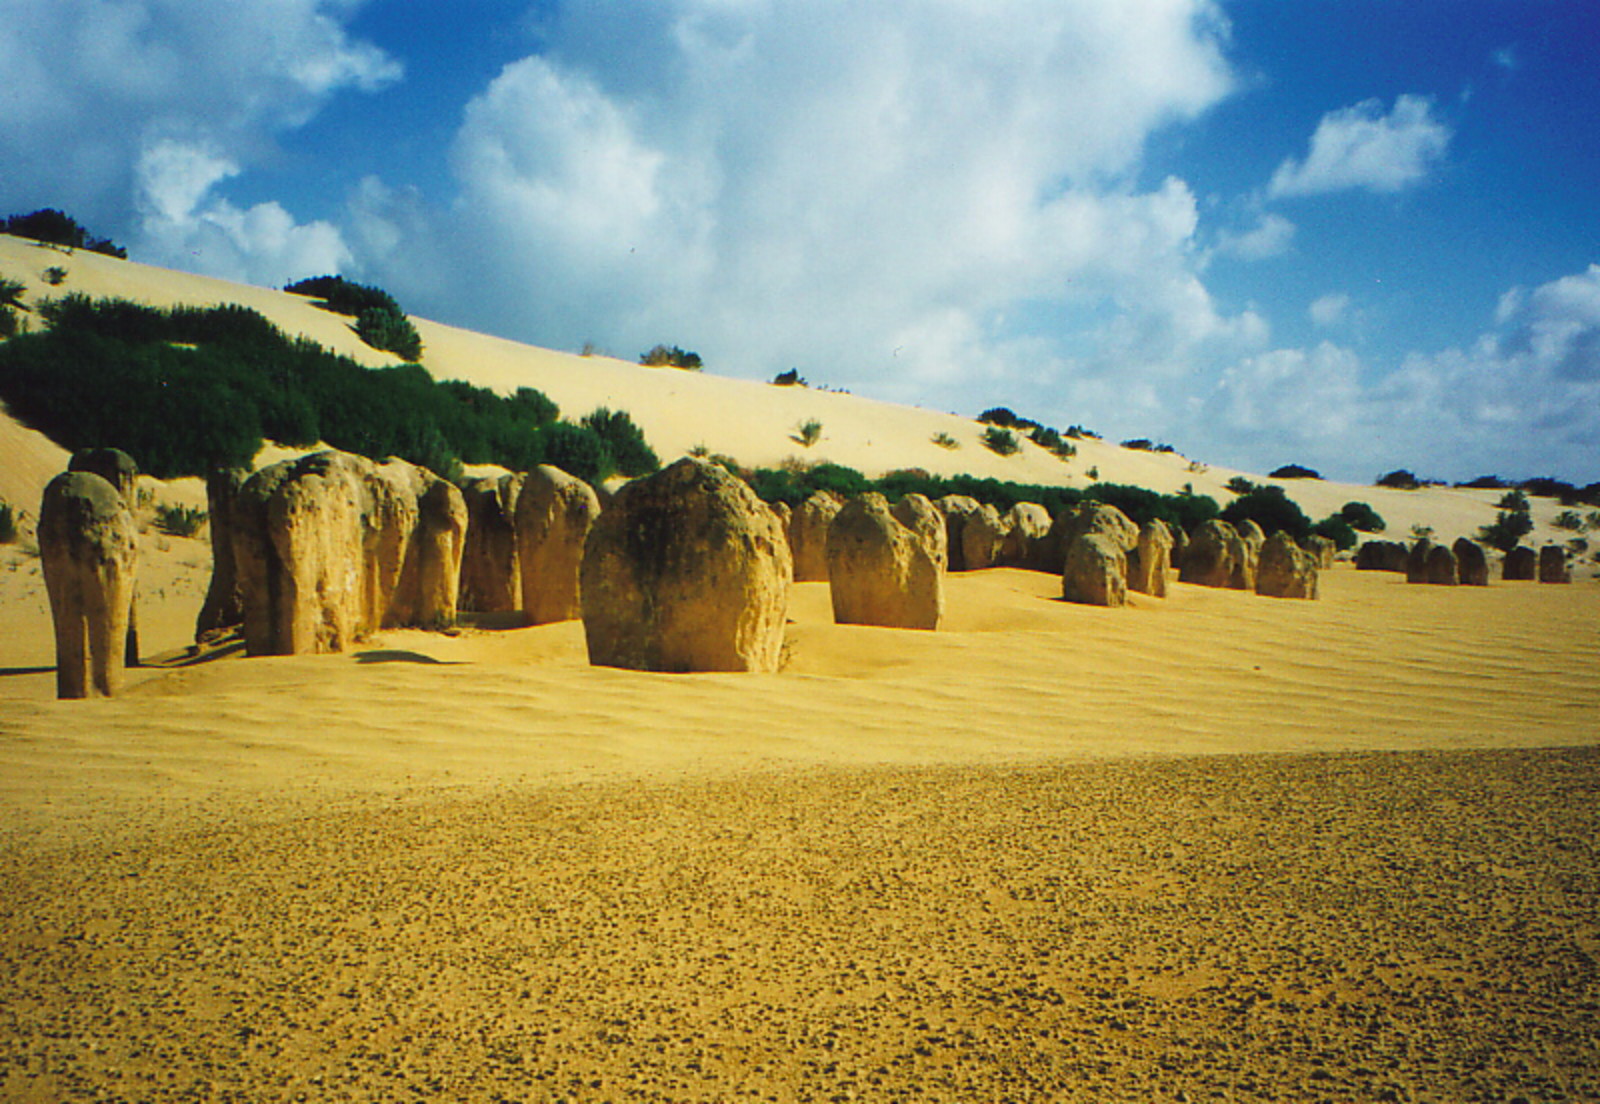 A collection of limestone stacks